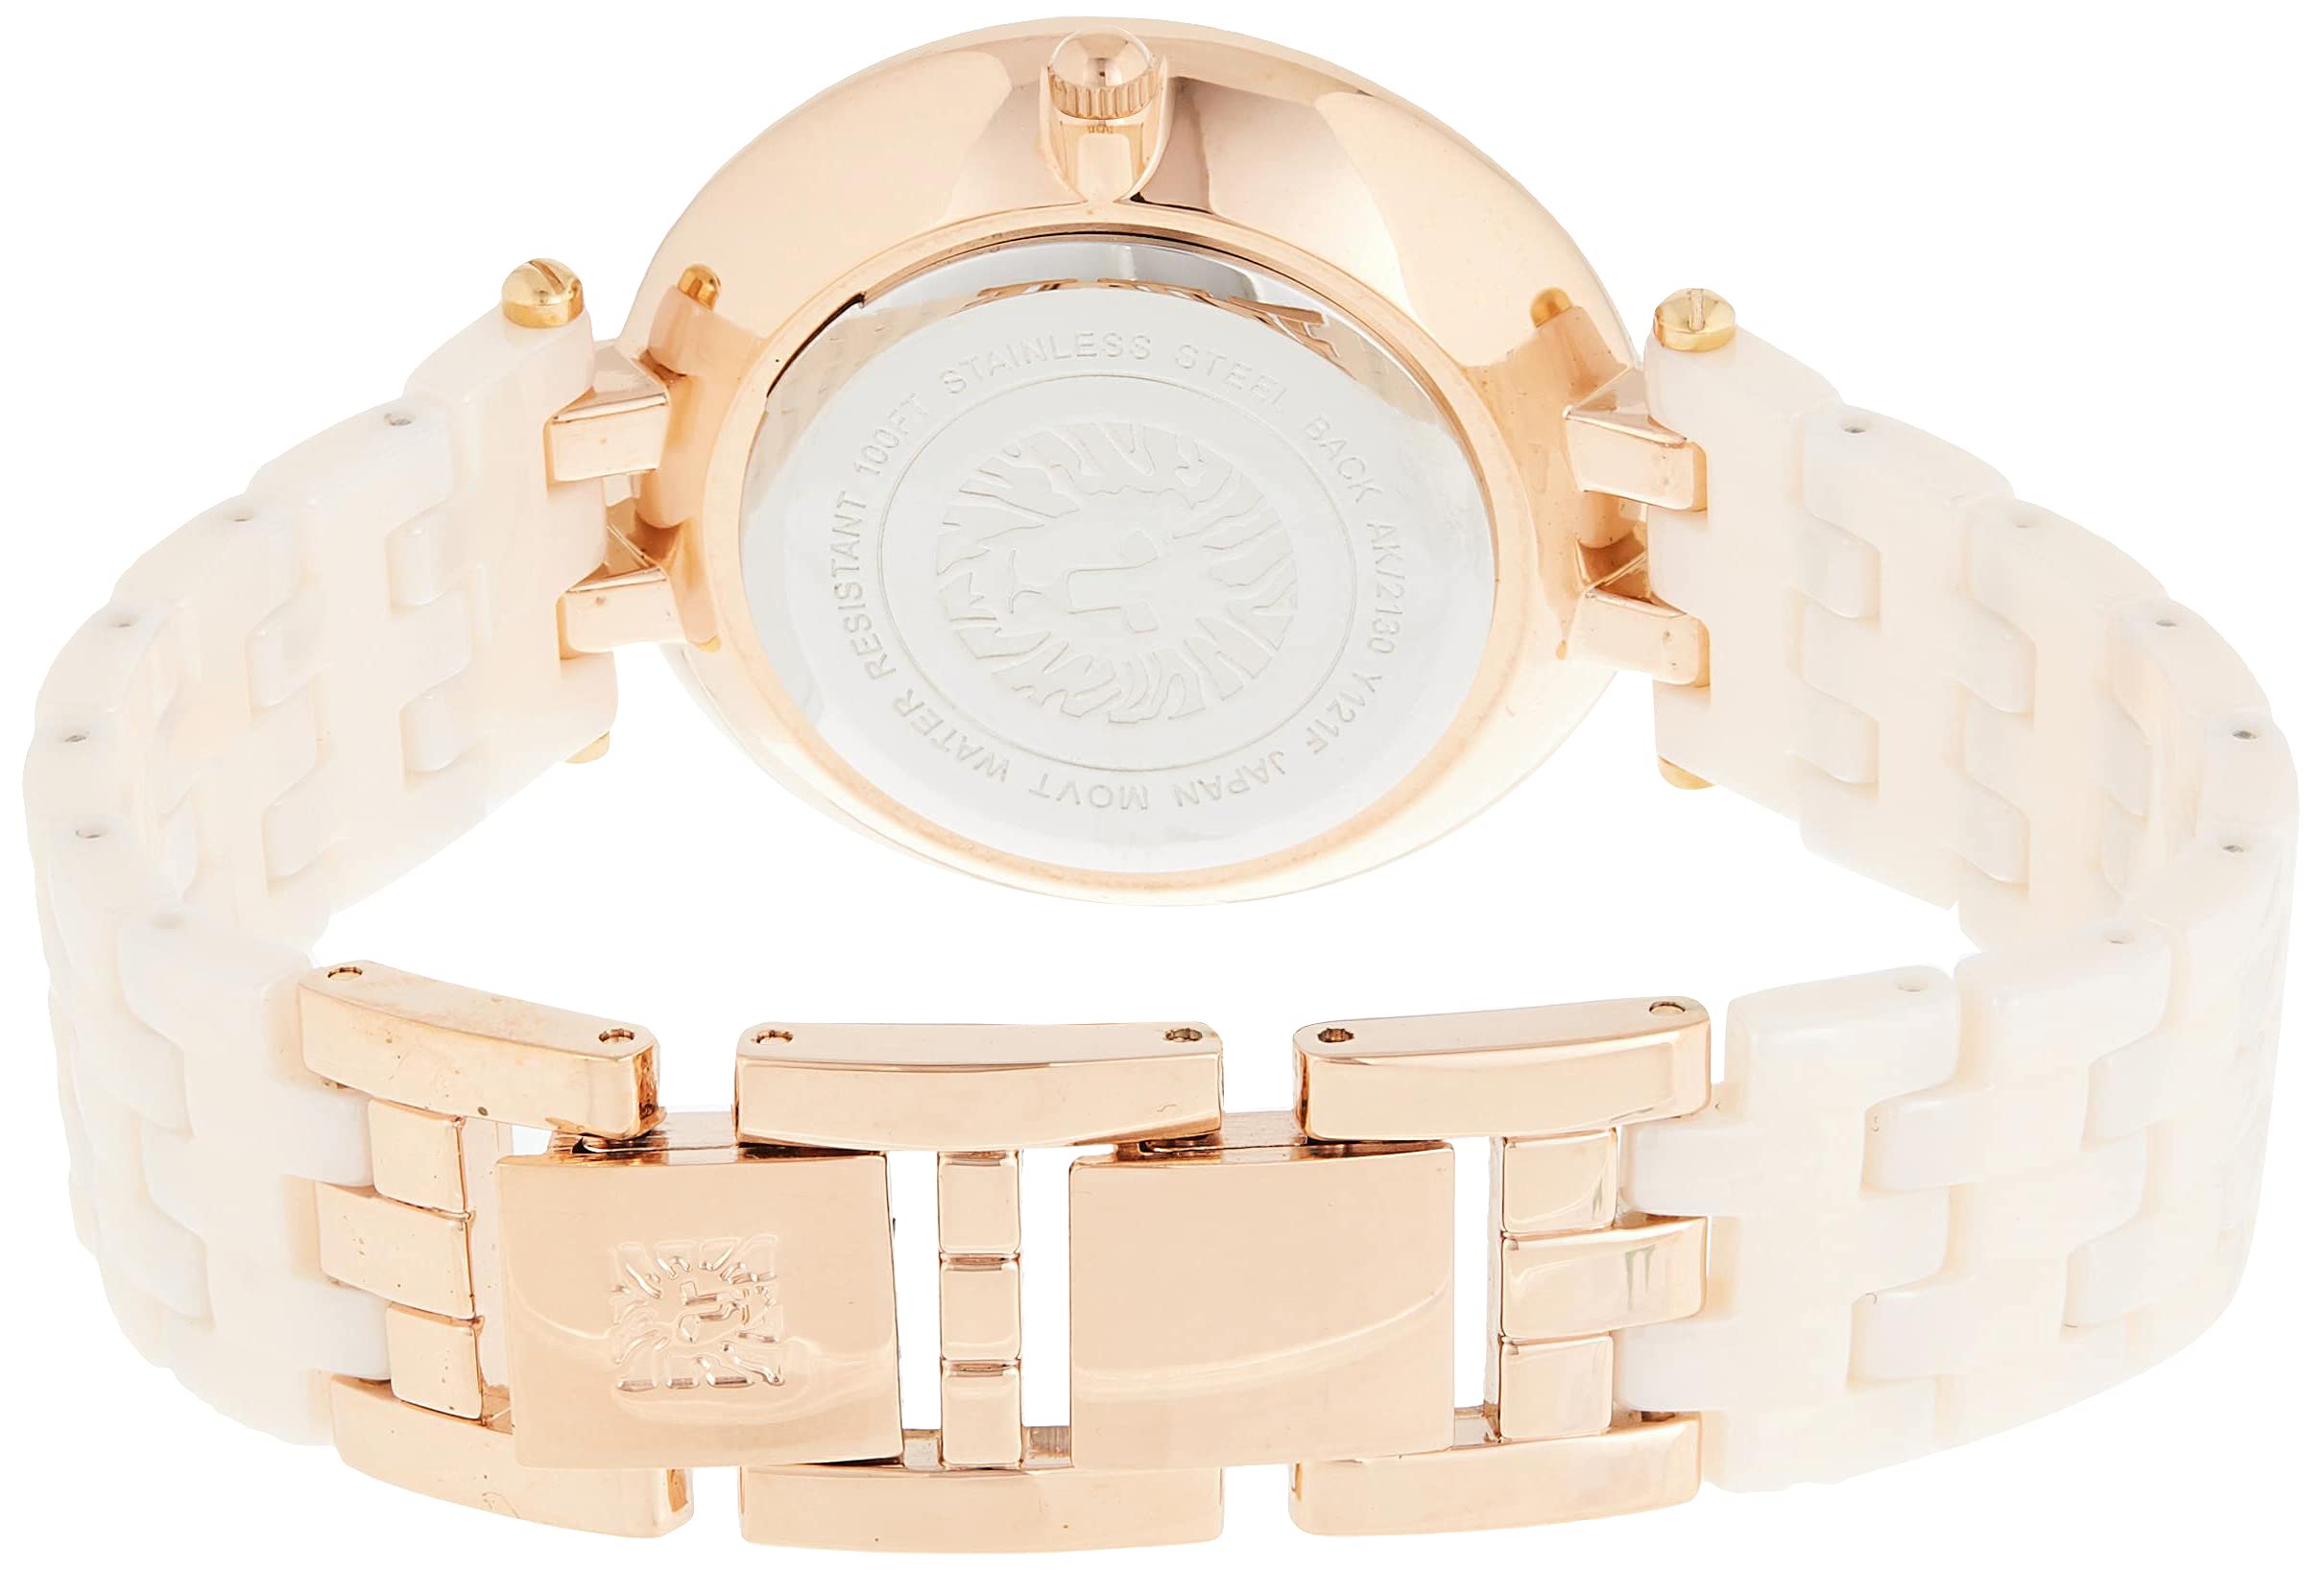 Anne Klein Women's AK/2130RGLP Premium Crystal-Accented Rose Gold-Tone and Light Pink Ceramic Bracelet Watch